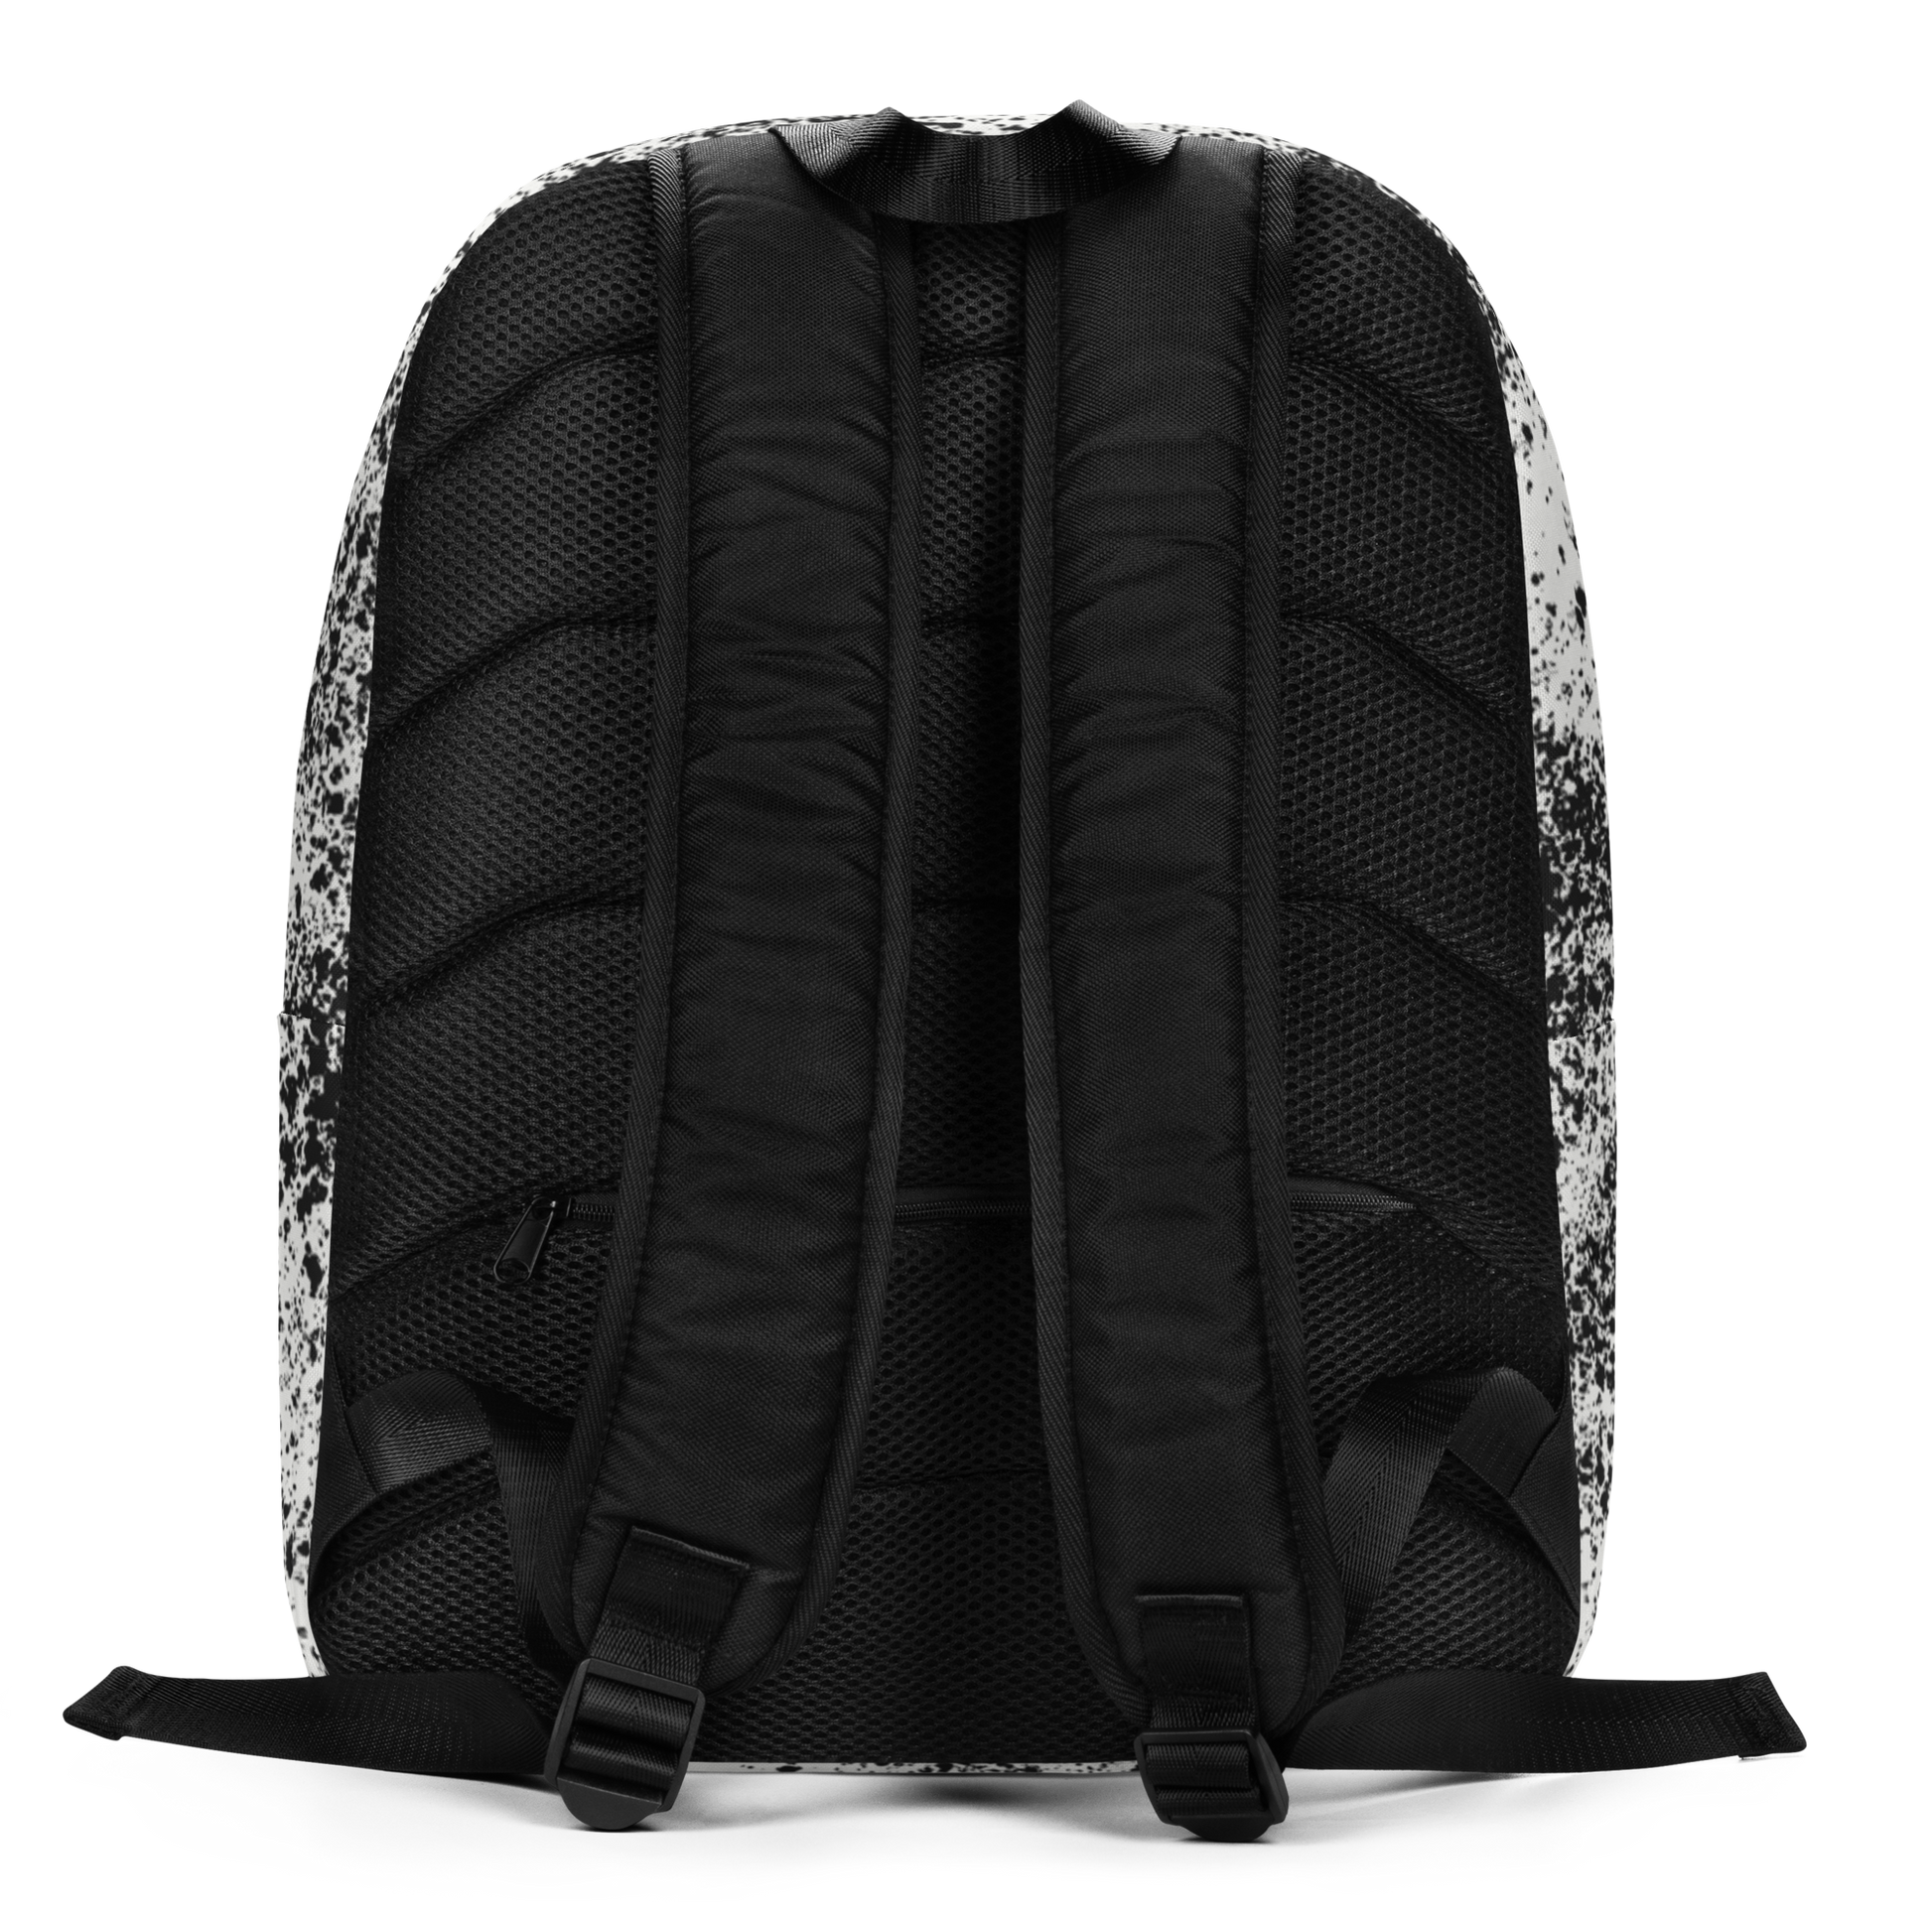 Neue City Adventure Backpack in black and white speckle pattern adjustable straps and secret zipper pocket